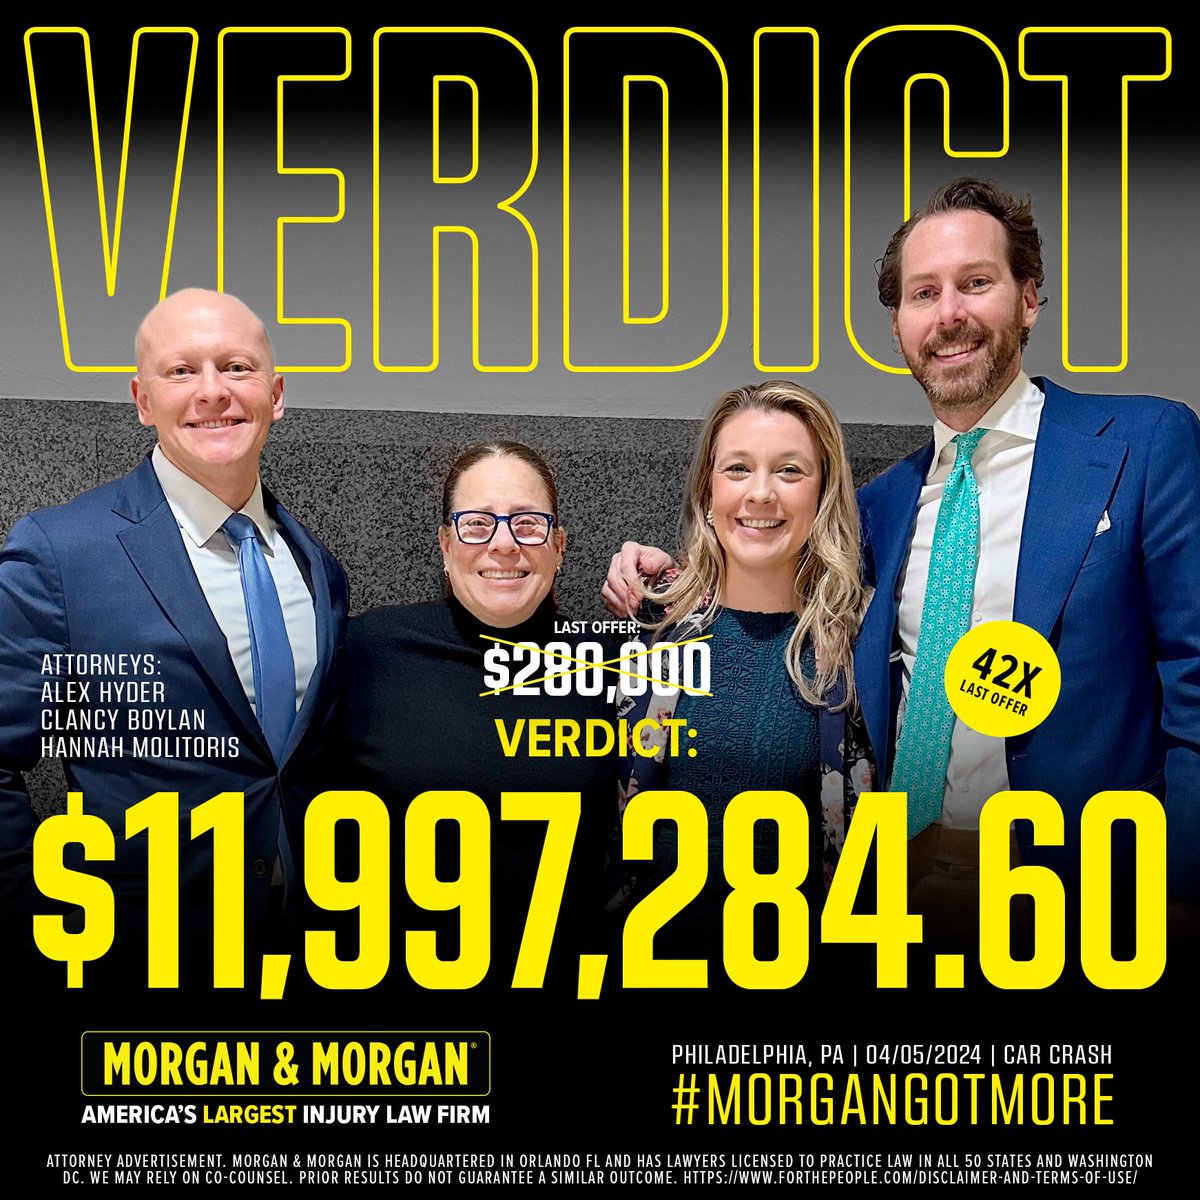 🚨#VerdictAlert: Alex Hyder, Clancy Boylan and Hannah Molitoris just secured a $11,997,284.60 verdict for our client in Philadelphia! So proud of this team for receiving 42x the last offer from big insurance #ForThePeople 💪